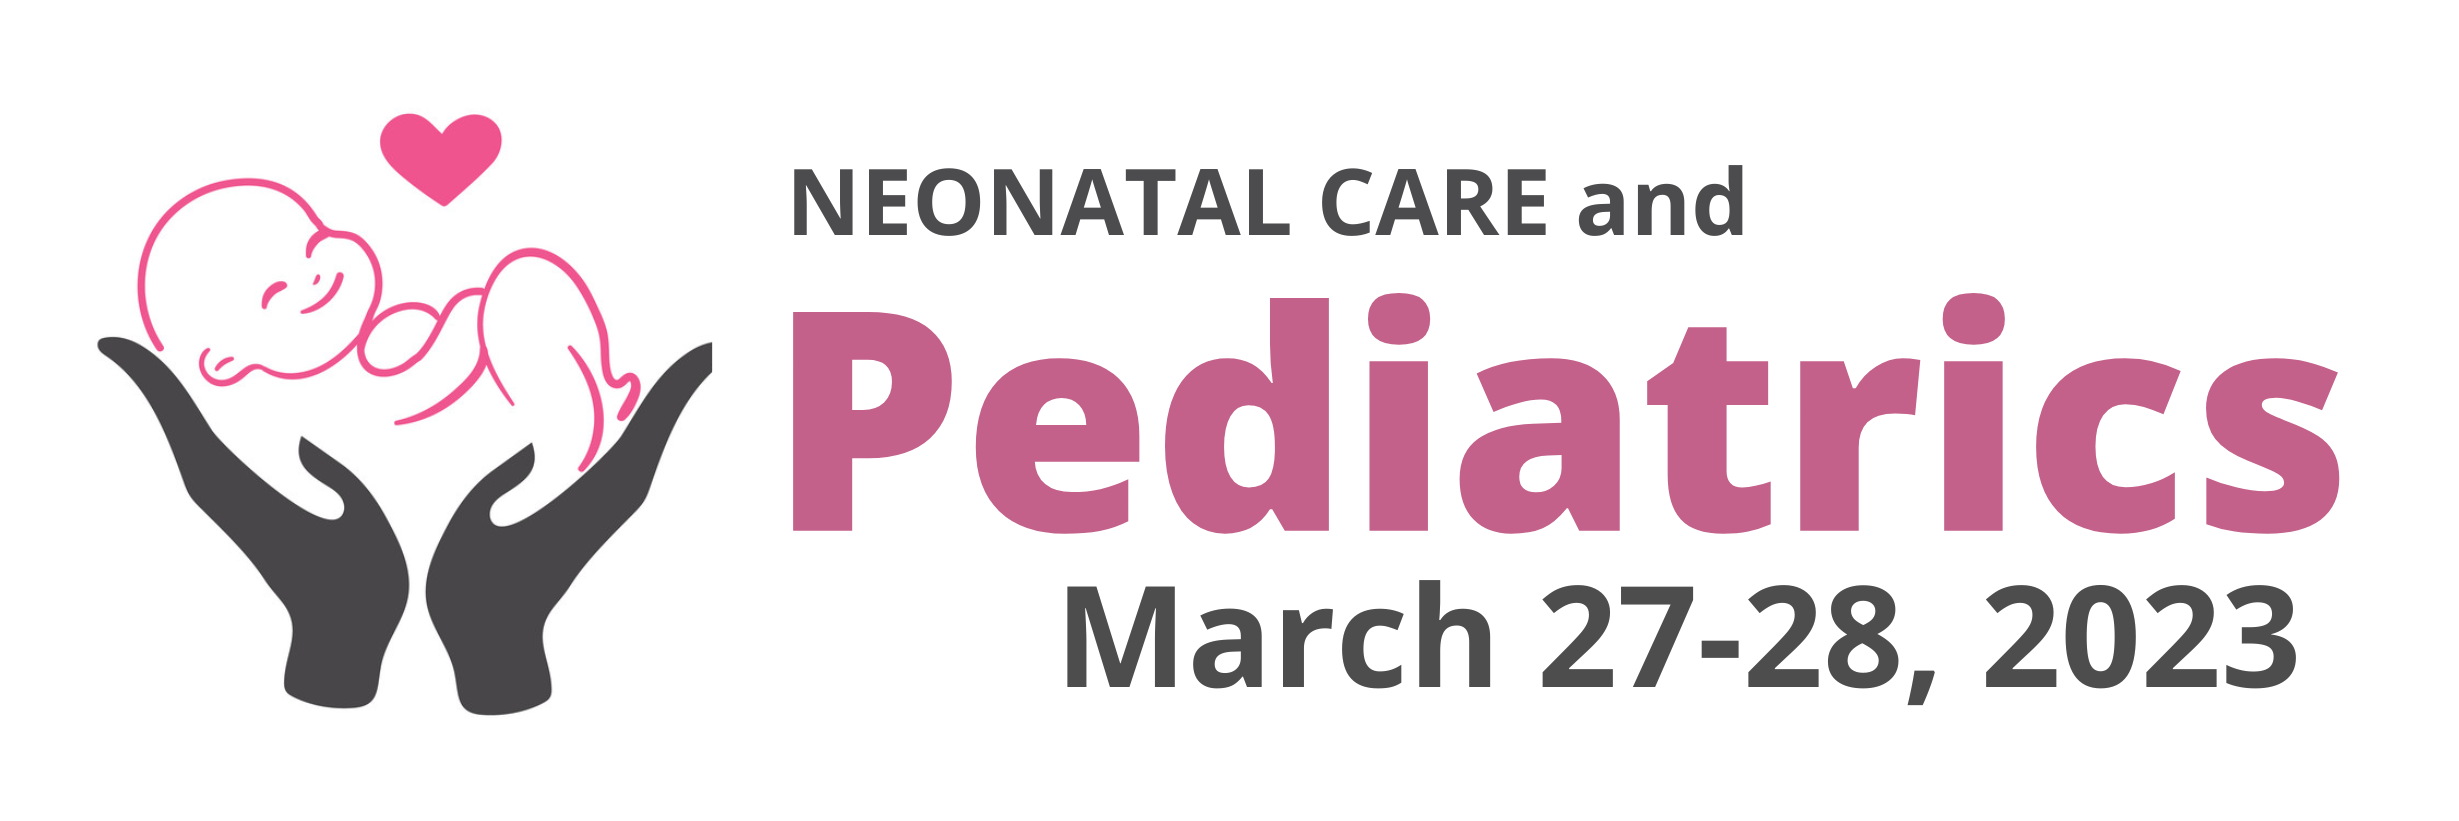 3rd International Conference on Pediatrics and Neonatal Care